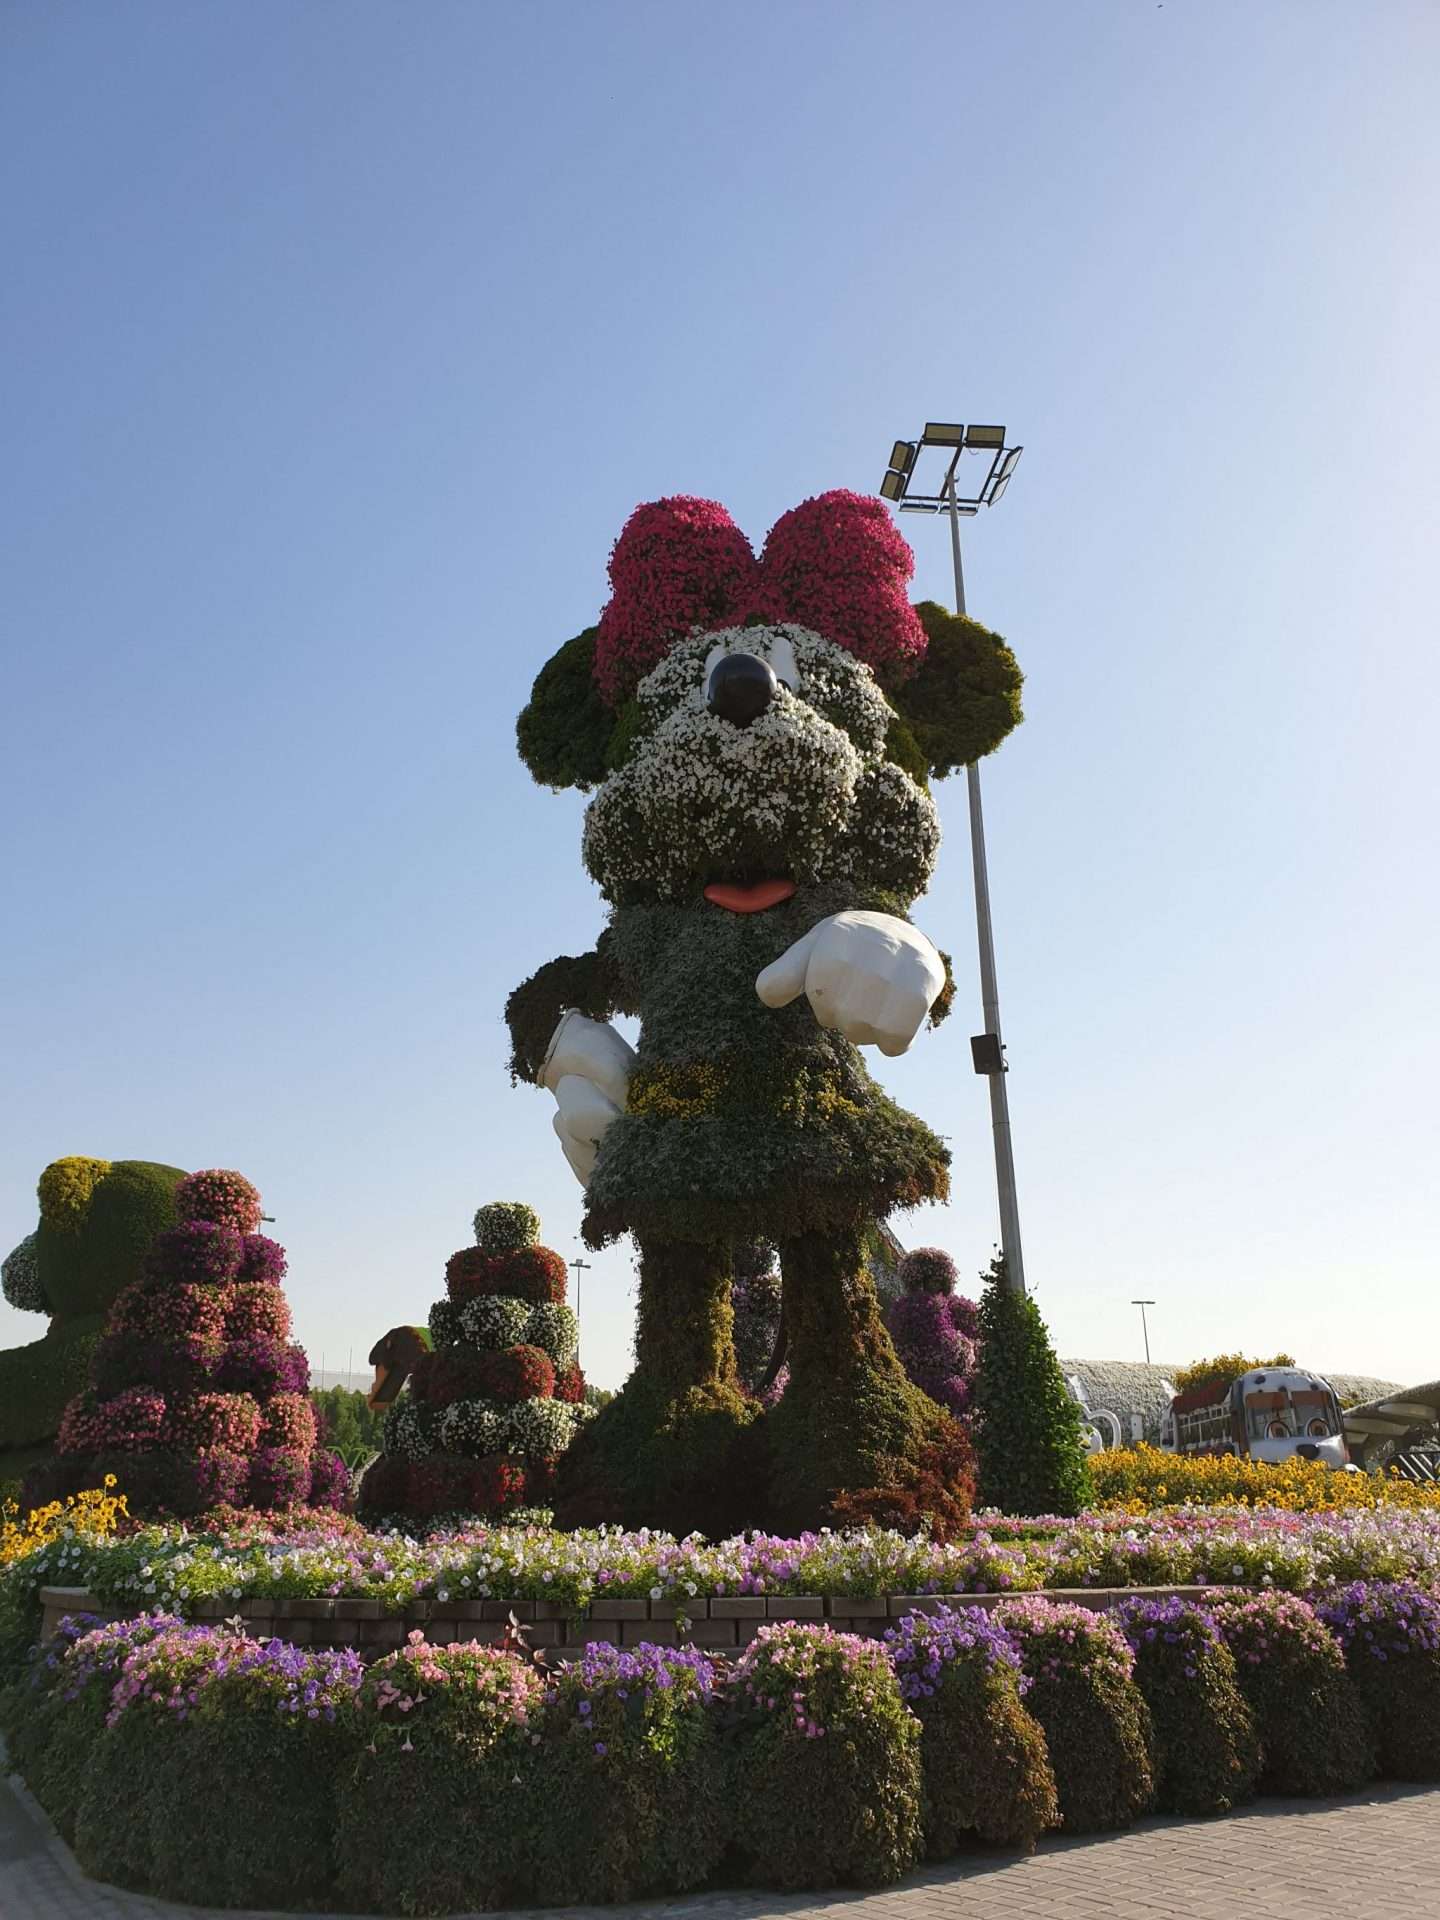 Dubai Miracle Garden - Things to see